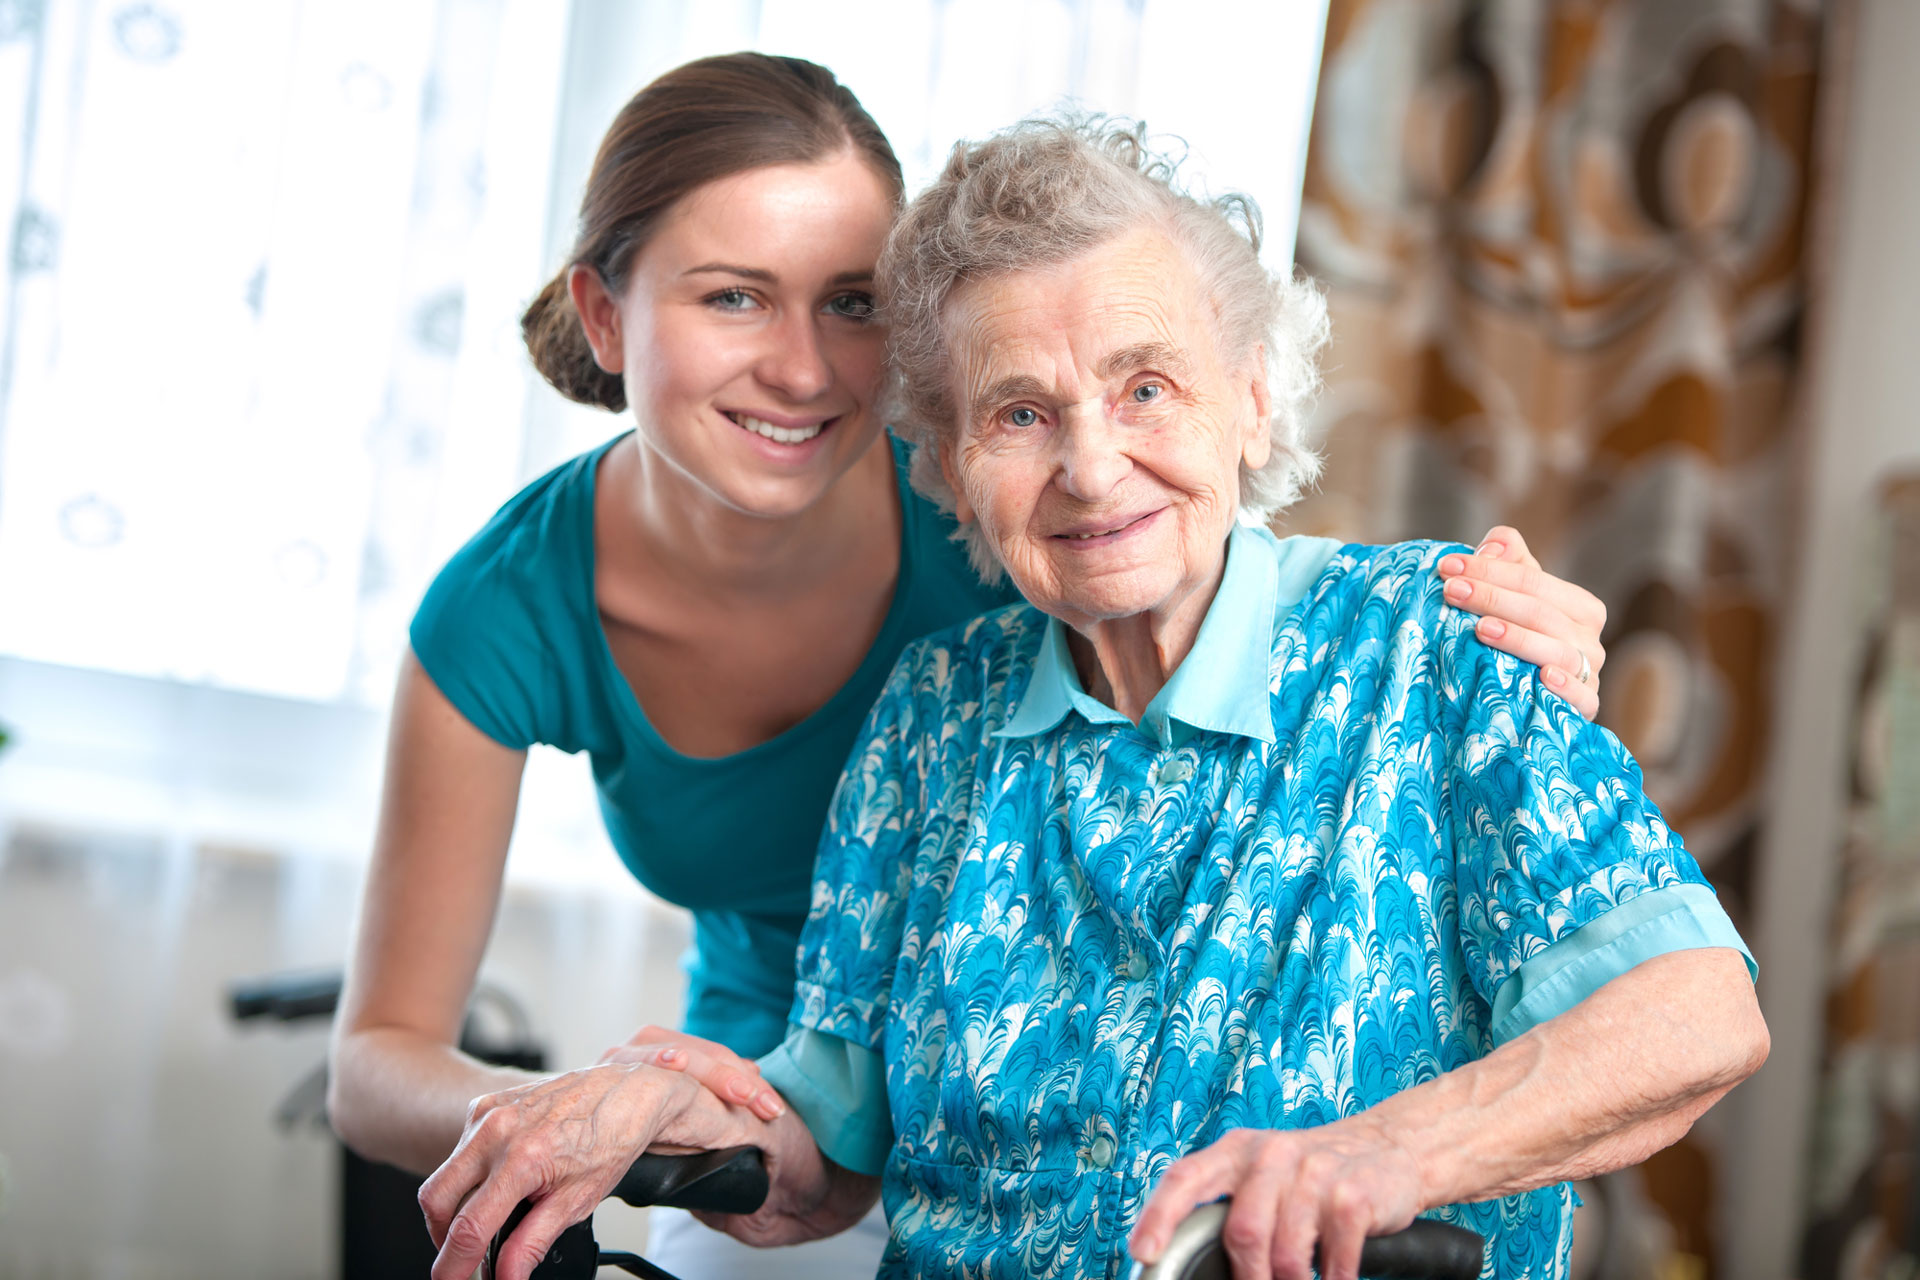 Bel Air's assisted living and memory care facility provides 24/7 care for its residents